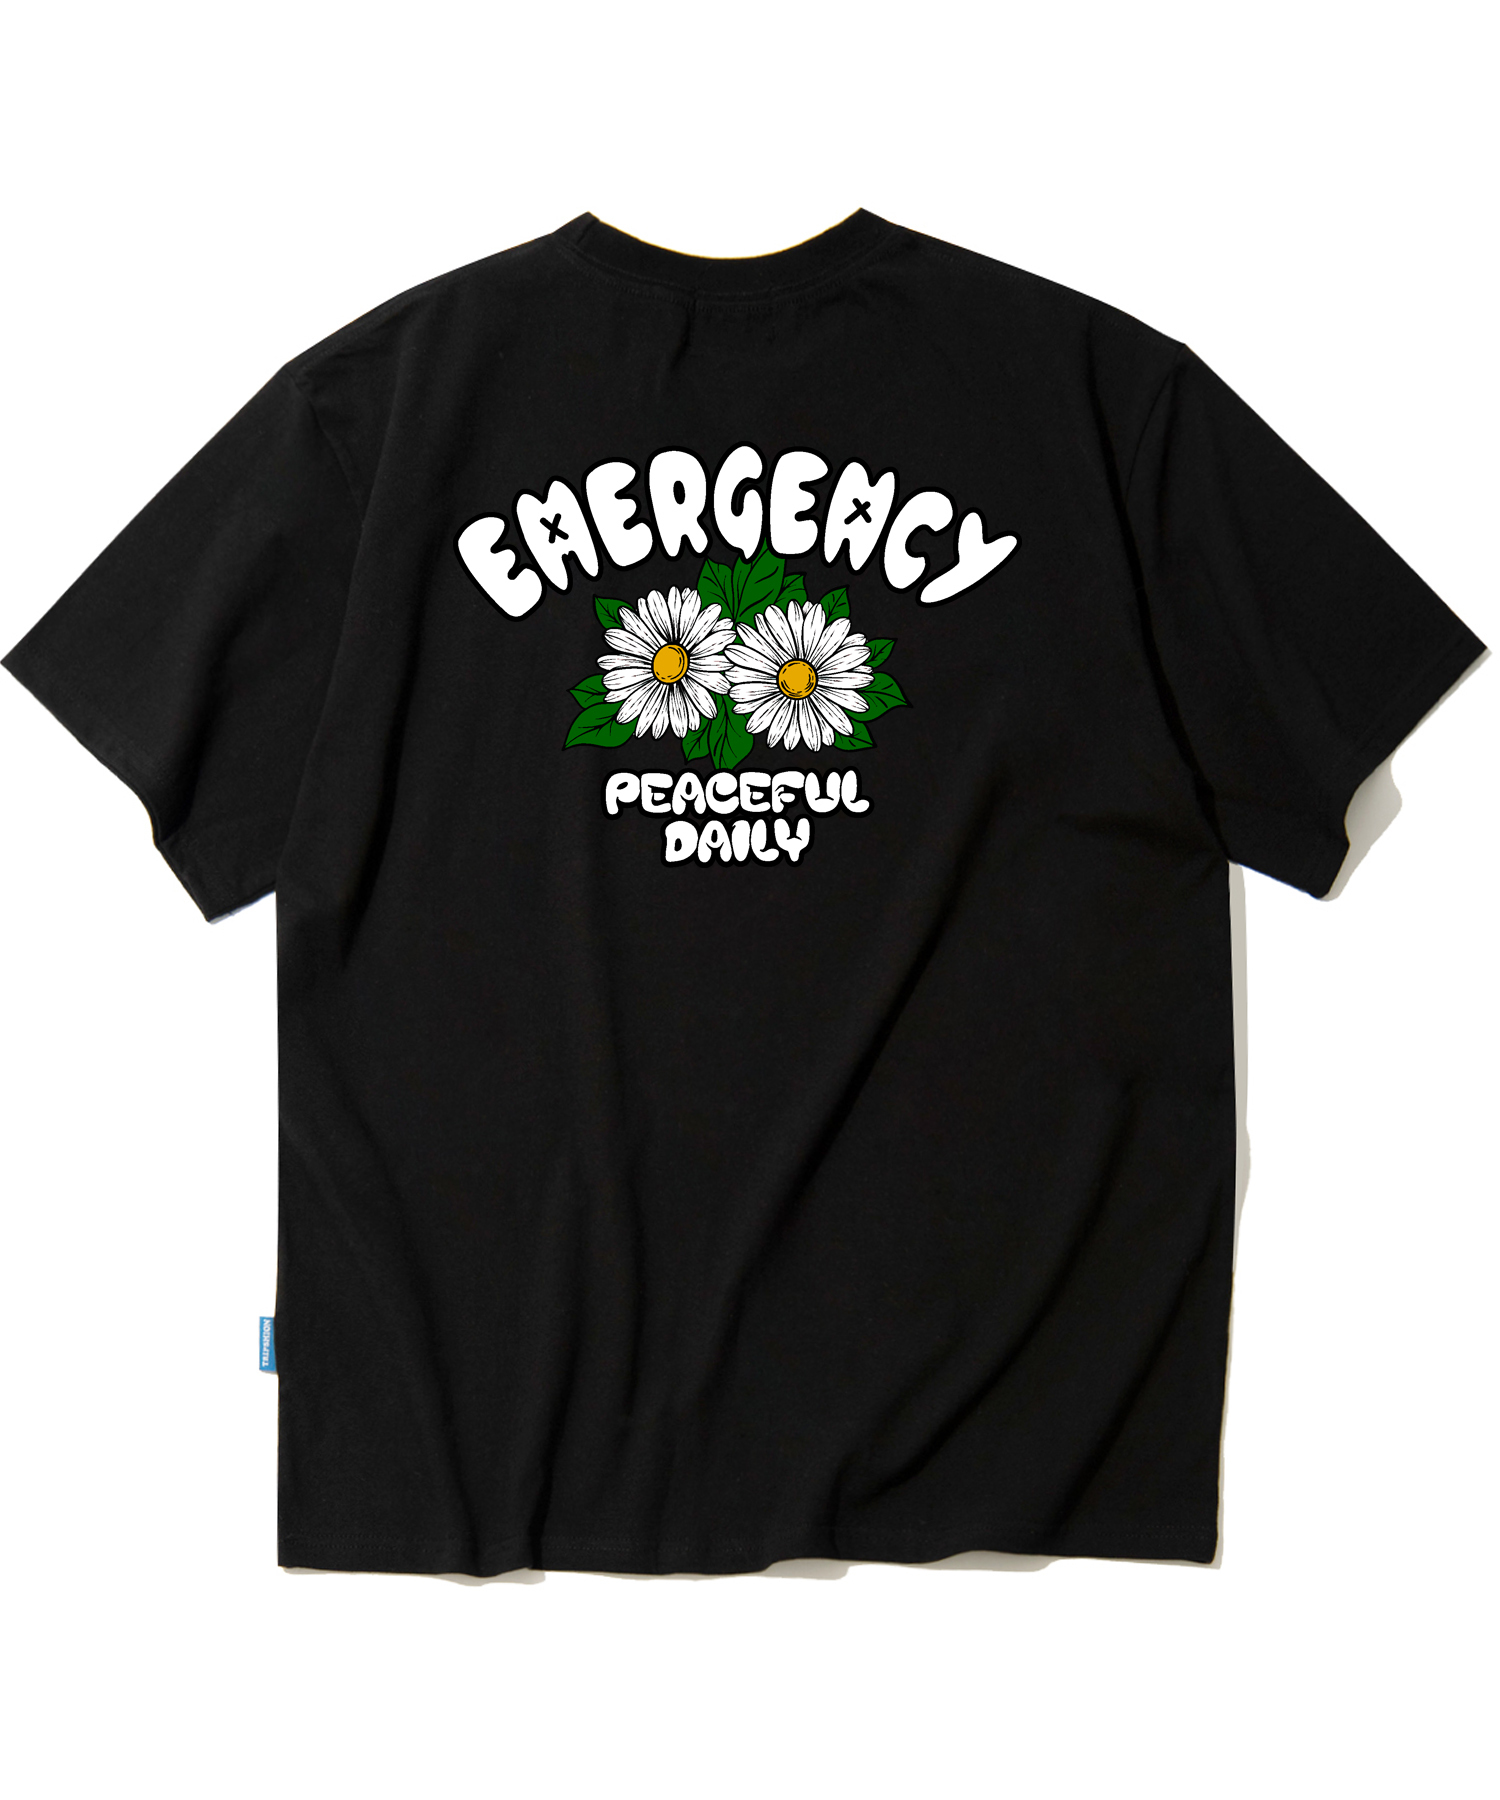 DOUBLE DAISY FLOWER GRAPHIC T-SHIRTS - BLACK